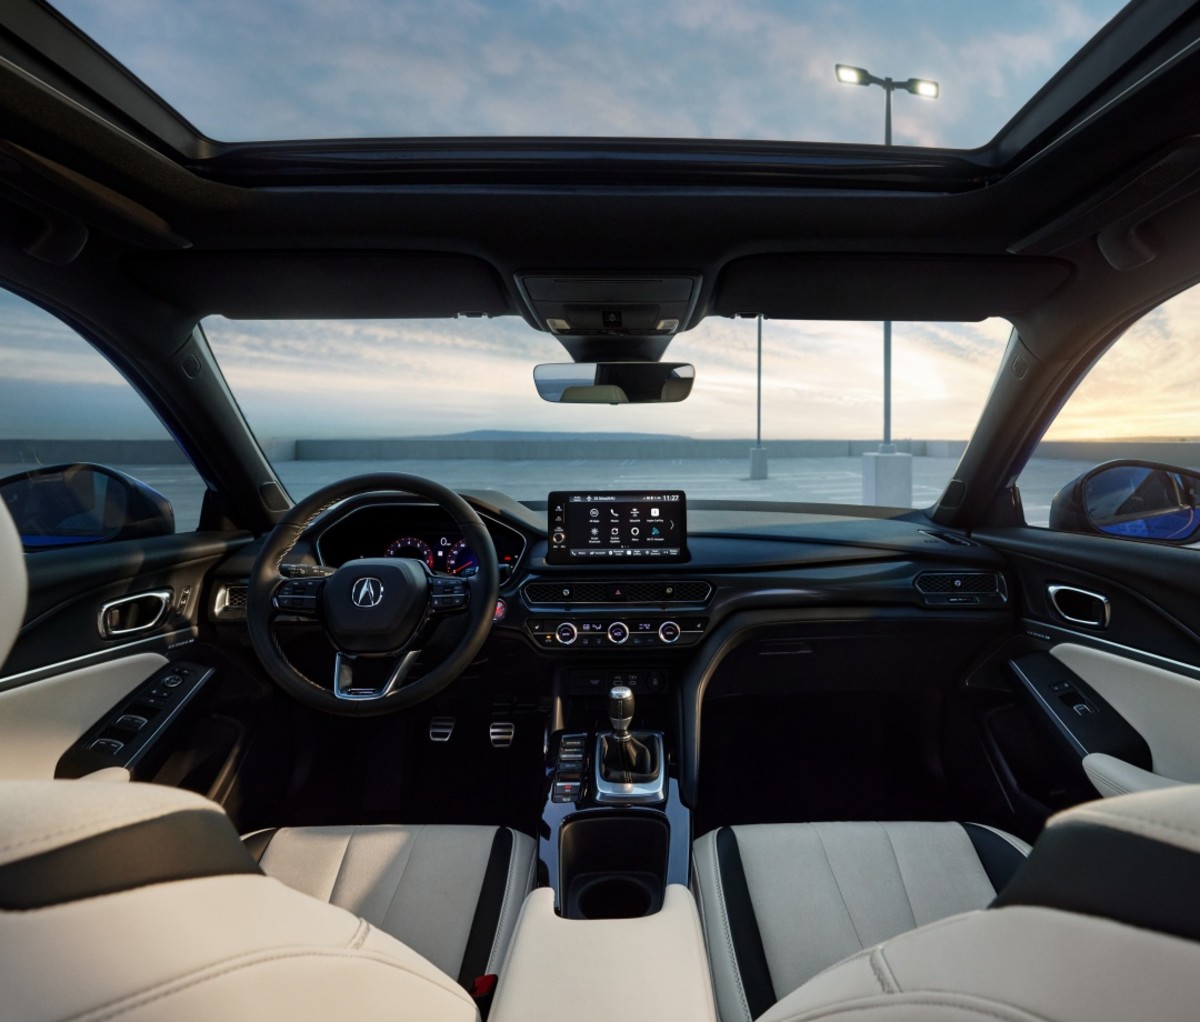 Interior of the 2023 Acura Integra showing the dashboard, gear shifter, steering wheel, windshield, sunroof, and white leather seats